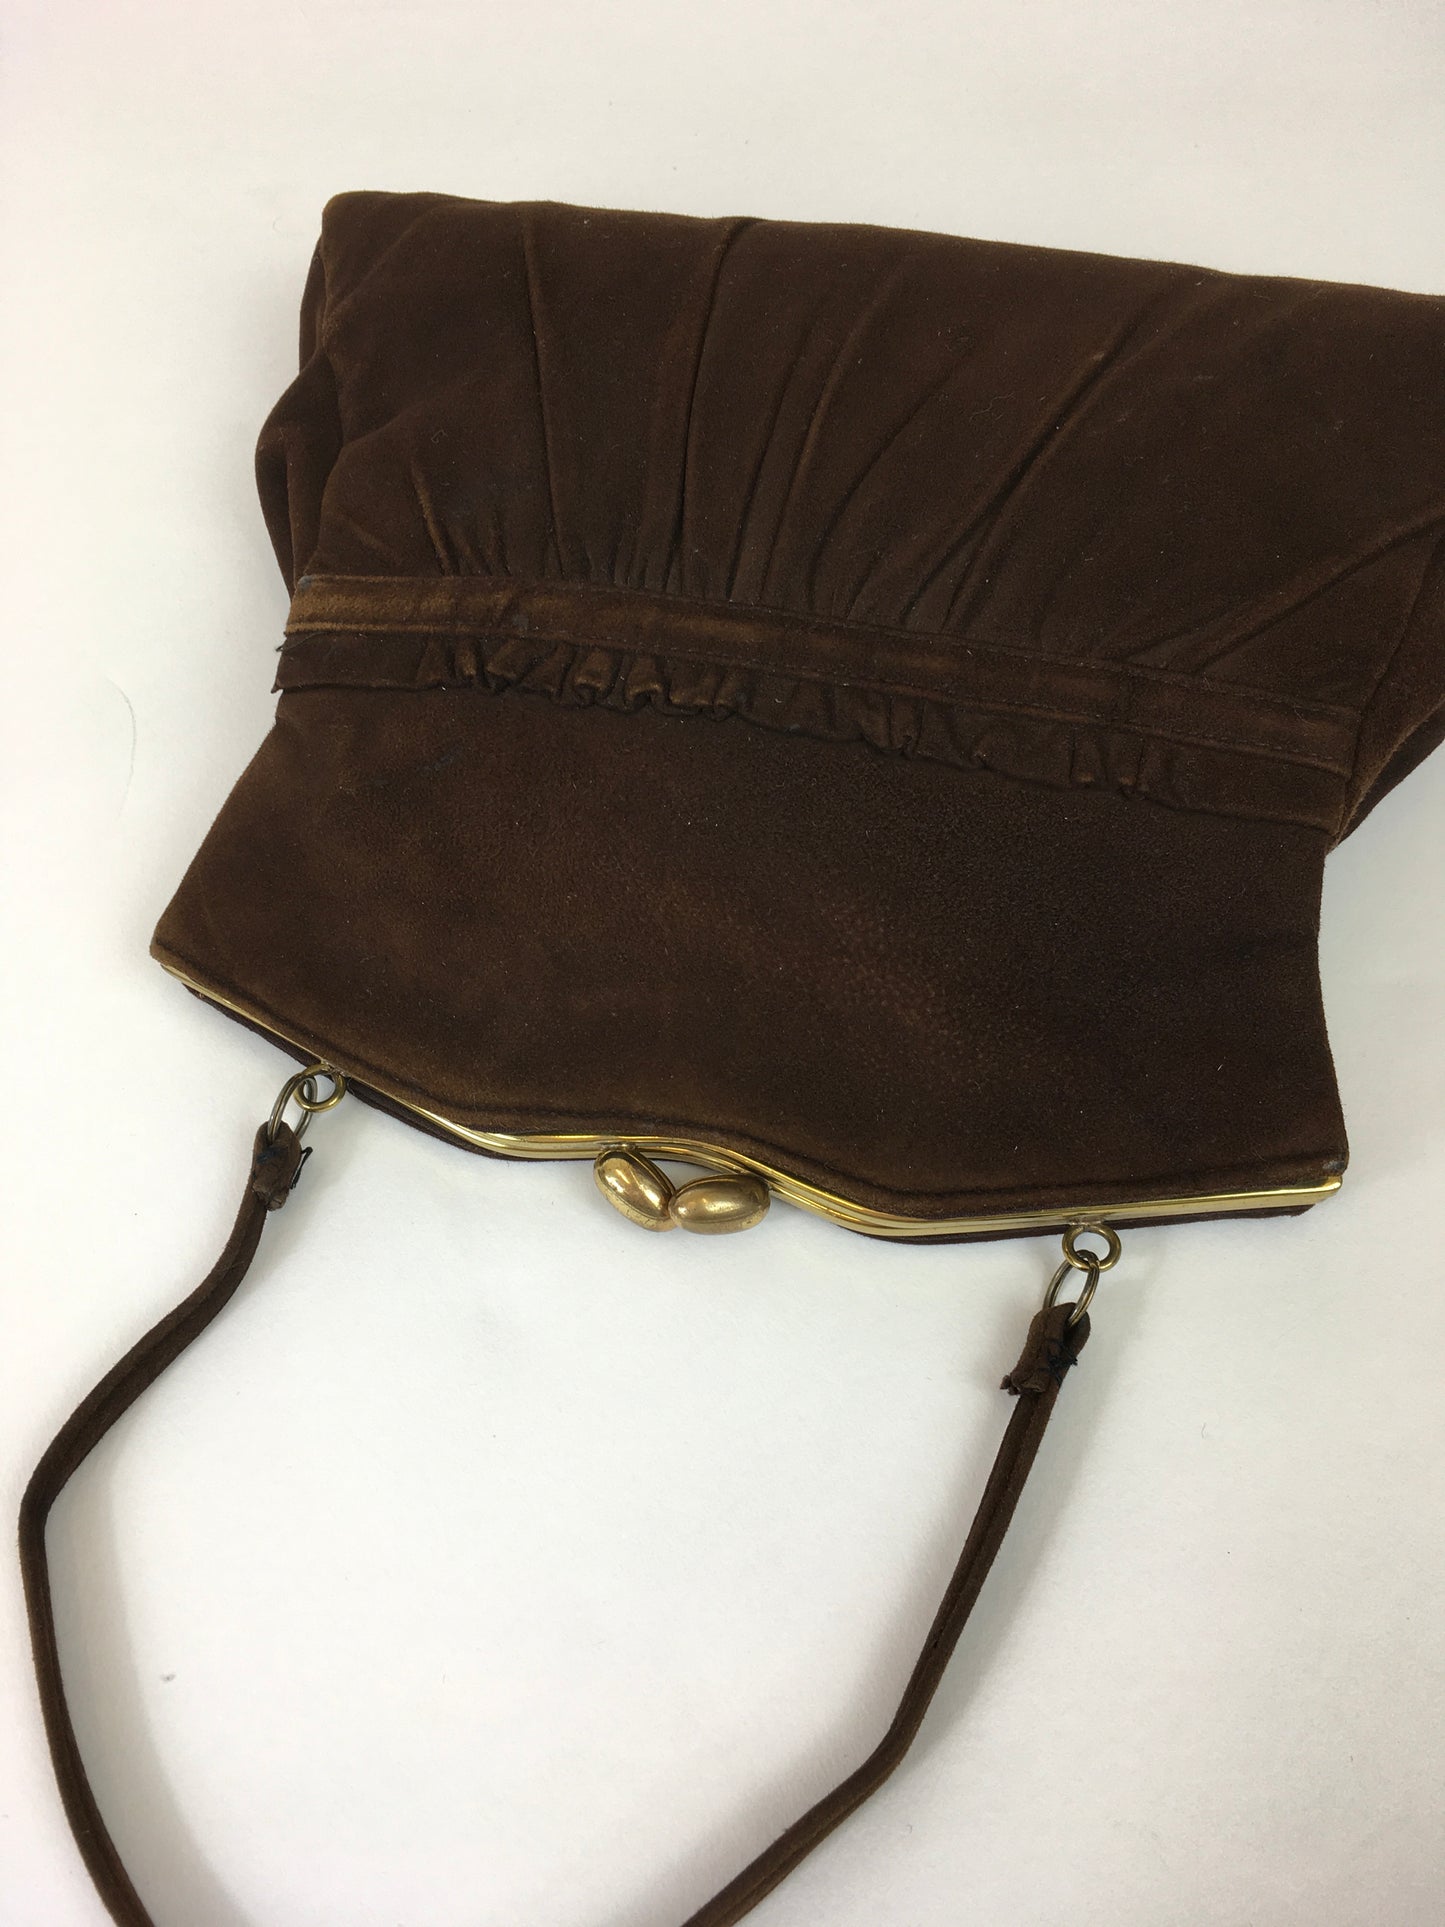 Original 1930s Darling Suede Handbag In Brown - Pleated Detailing To The Front